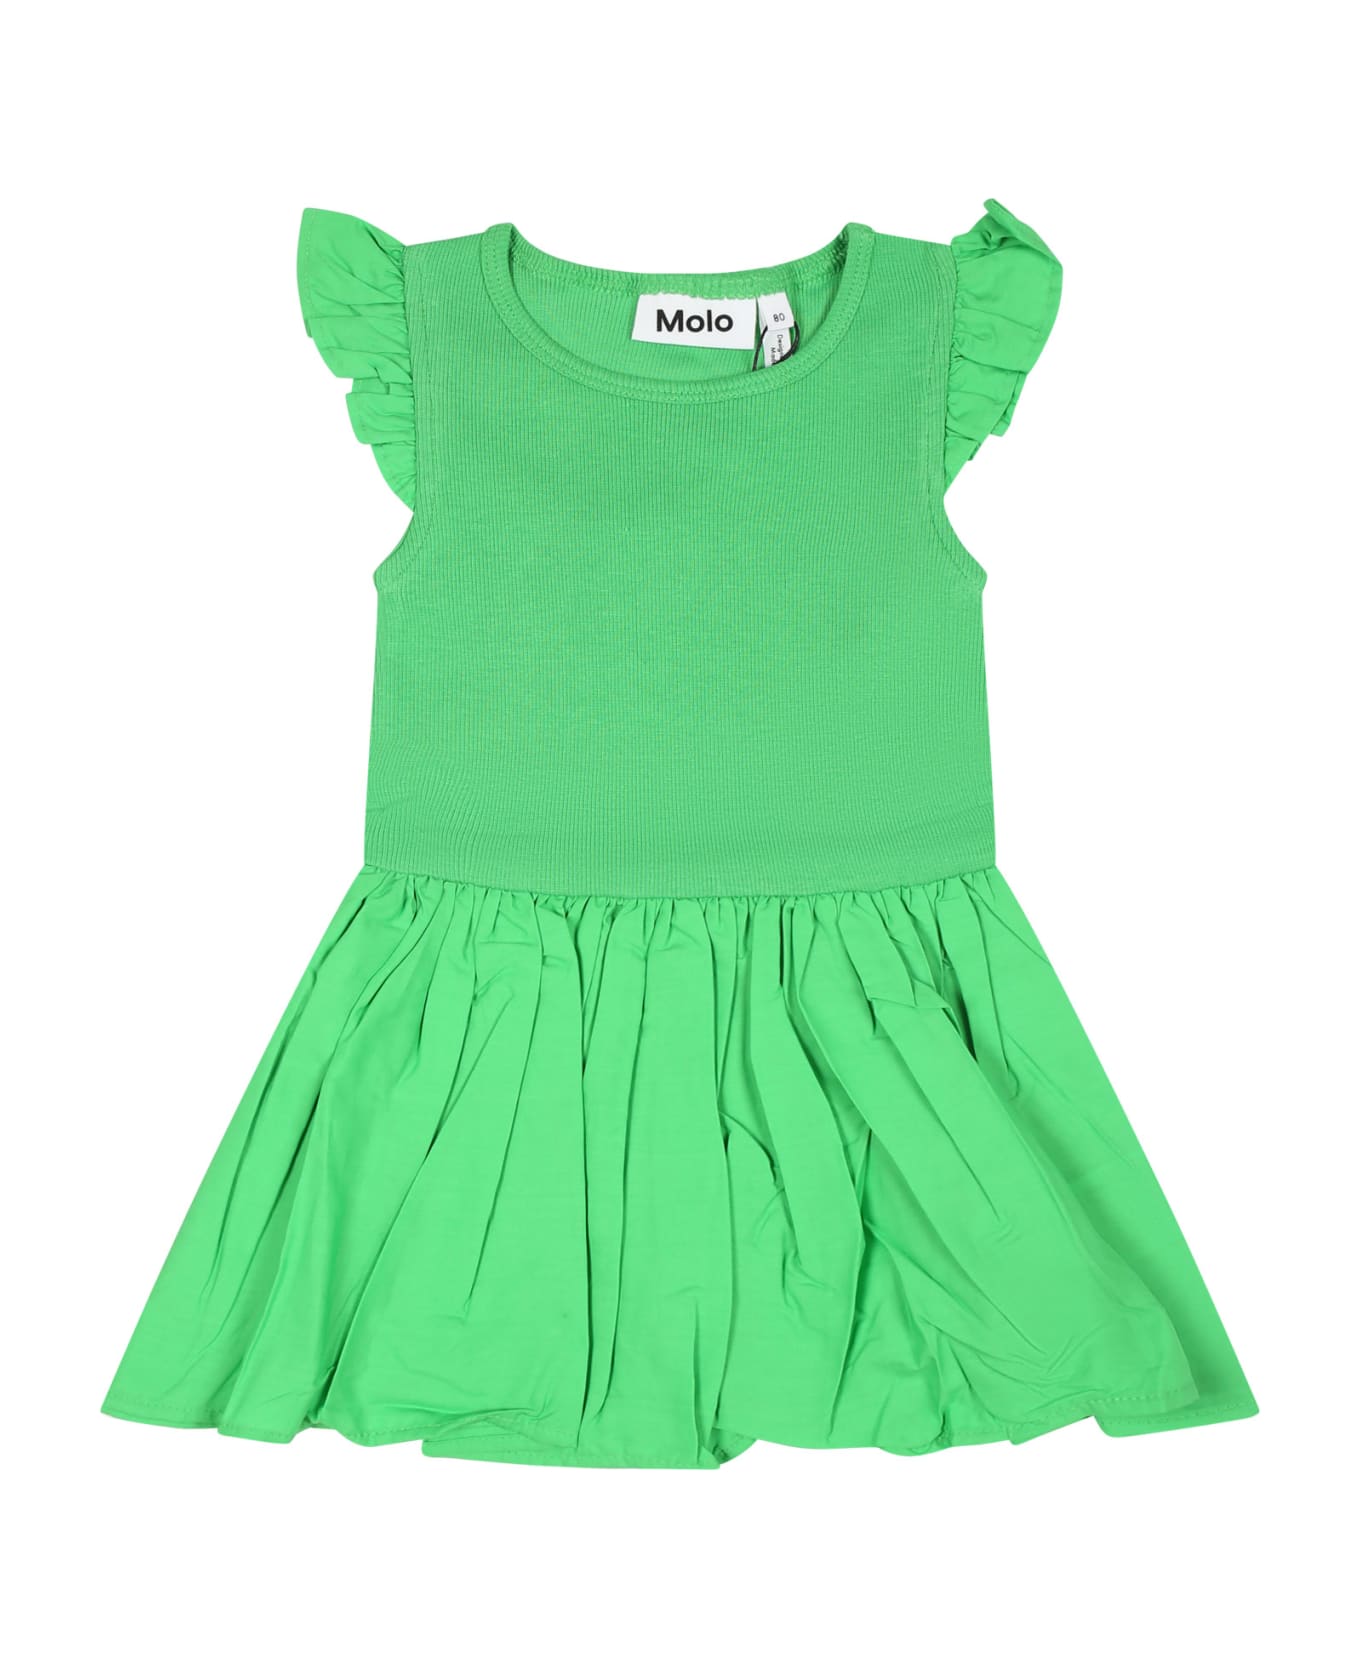 Molo Green Dress For Baby Girl - Green